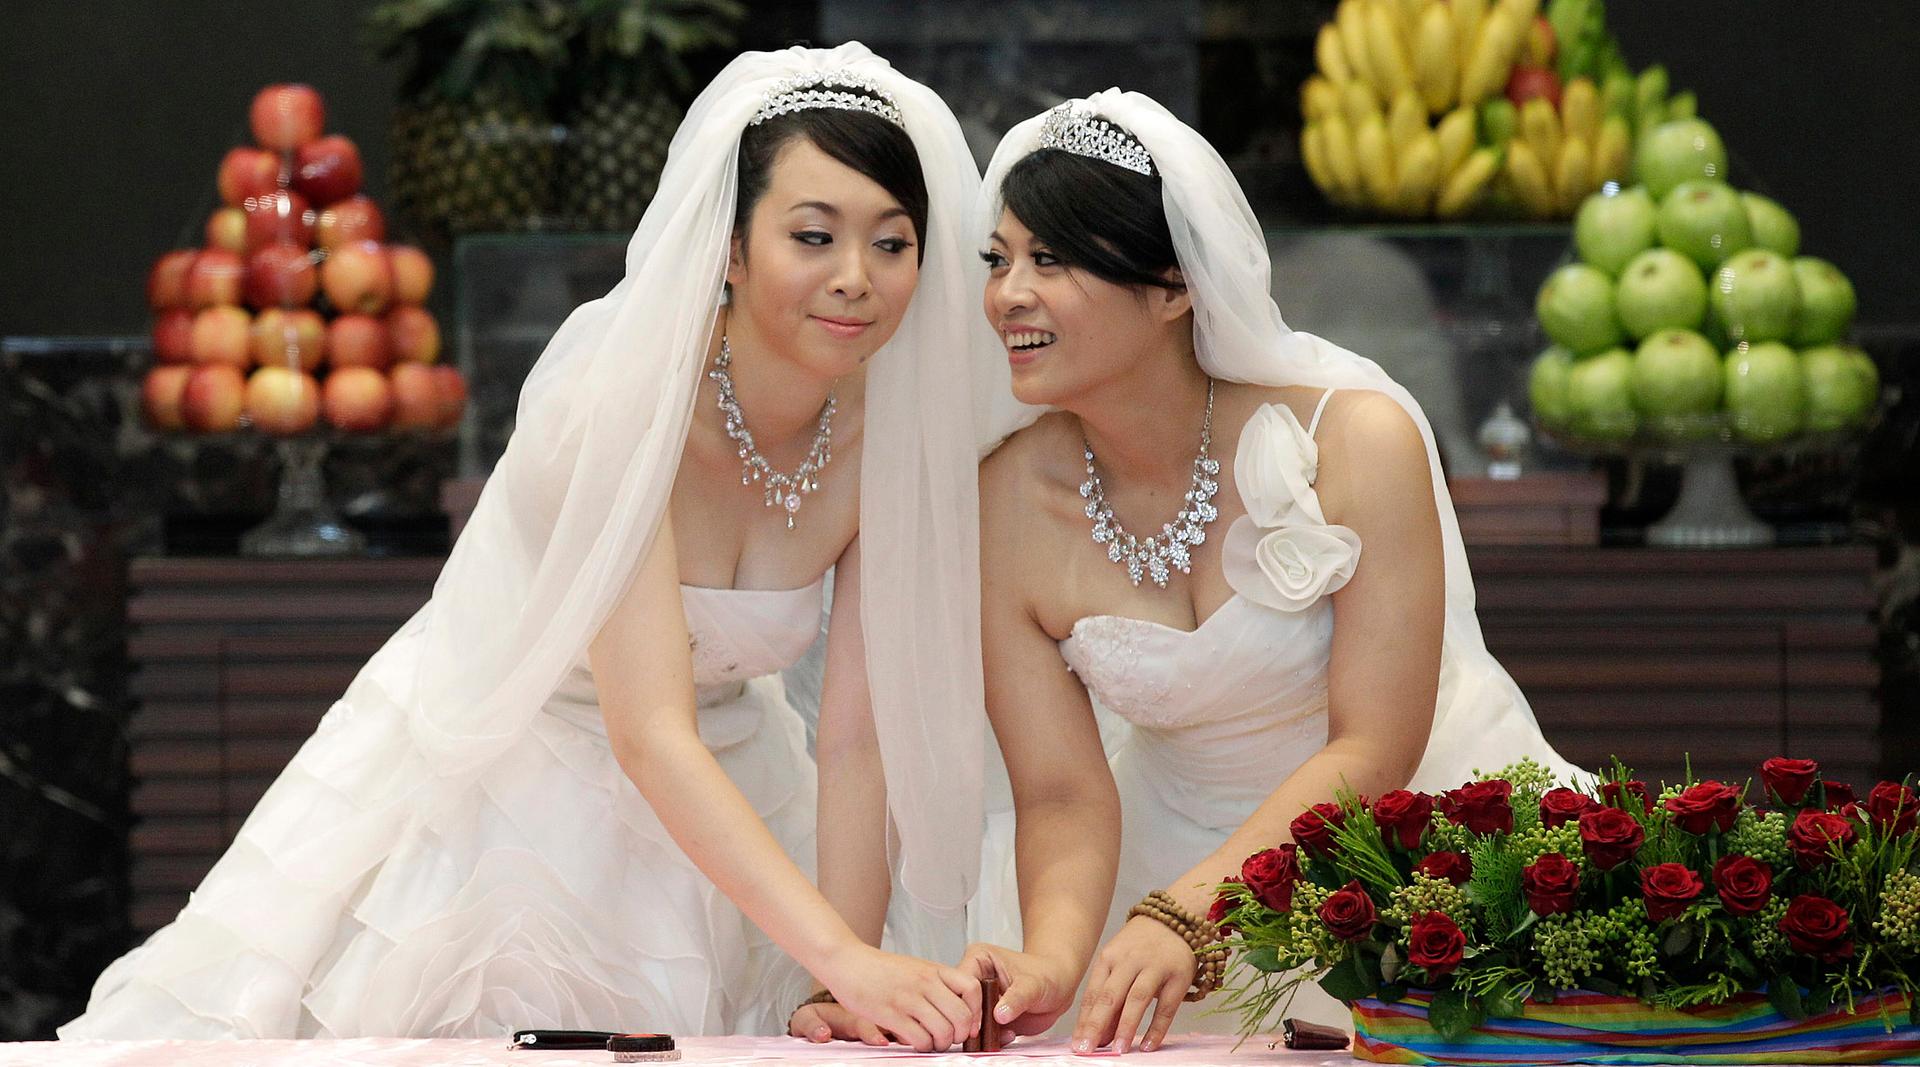 You Ya-ting, left, and Huang Mei-yu cast their stamps during their symbolic same-sex Buddhist wedding ceremony at a temple in Taoyuan county, northern Taiwan, on Aug. 11, 2012.